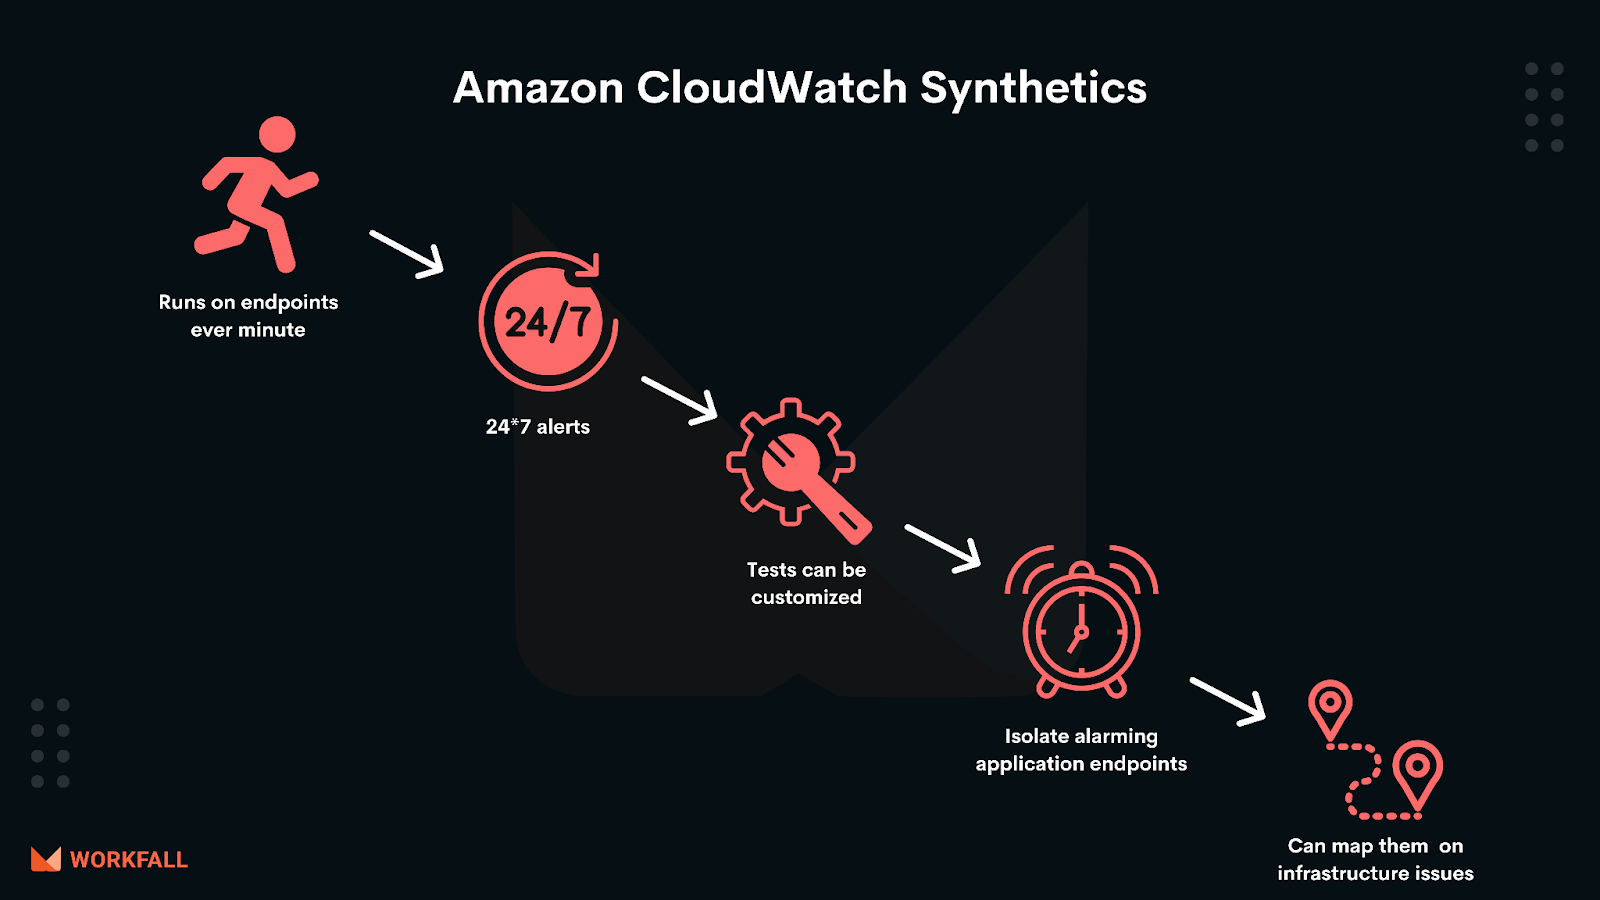 What is Amazon CloudWatch Synthetics?